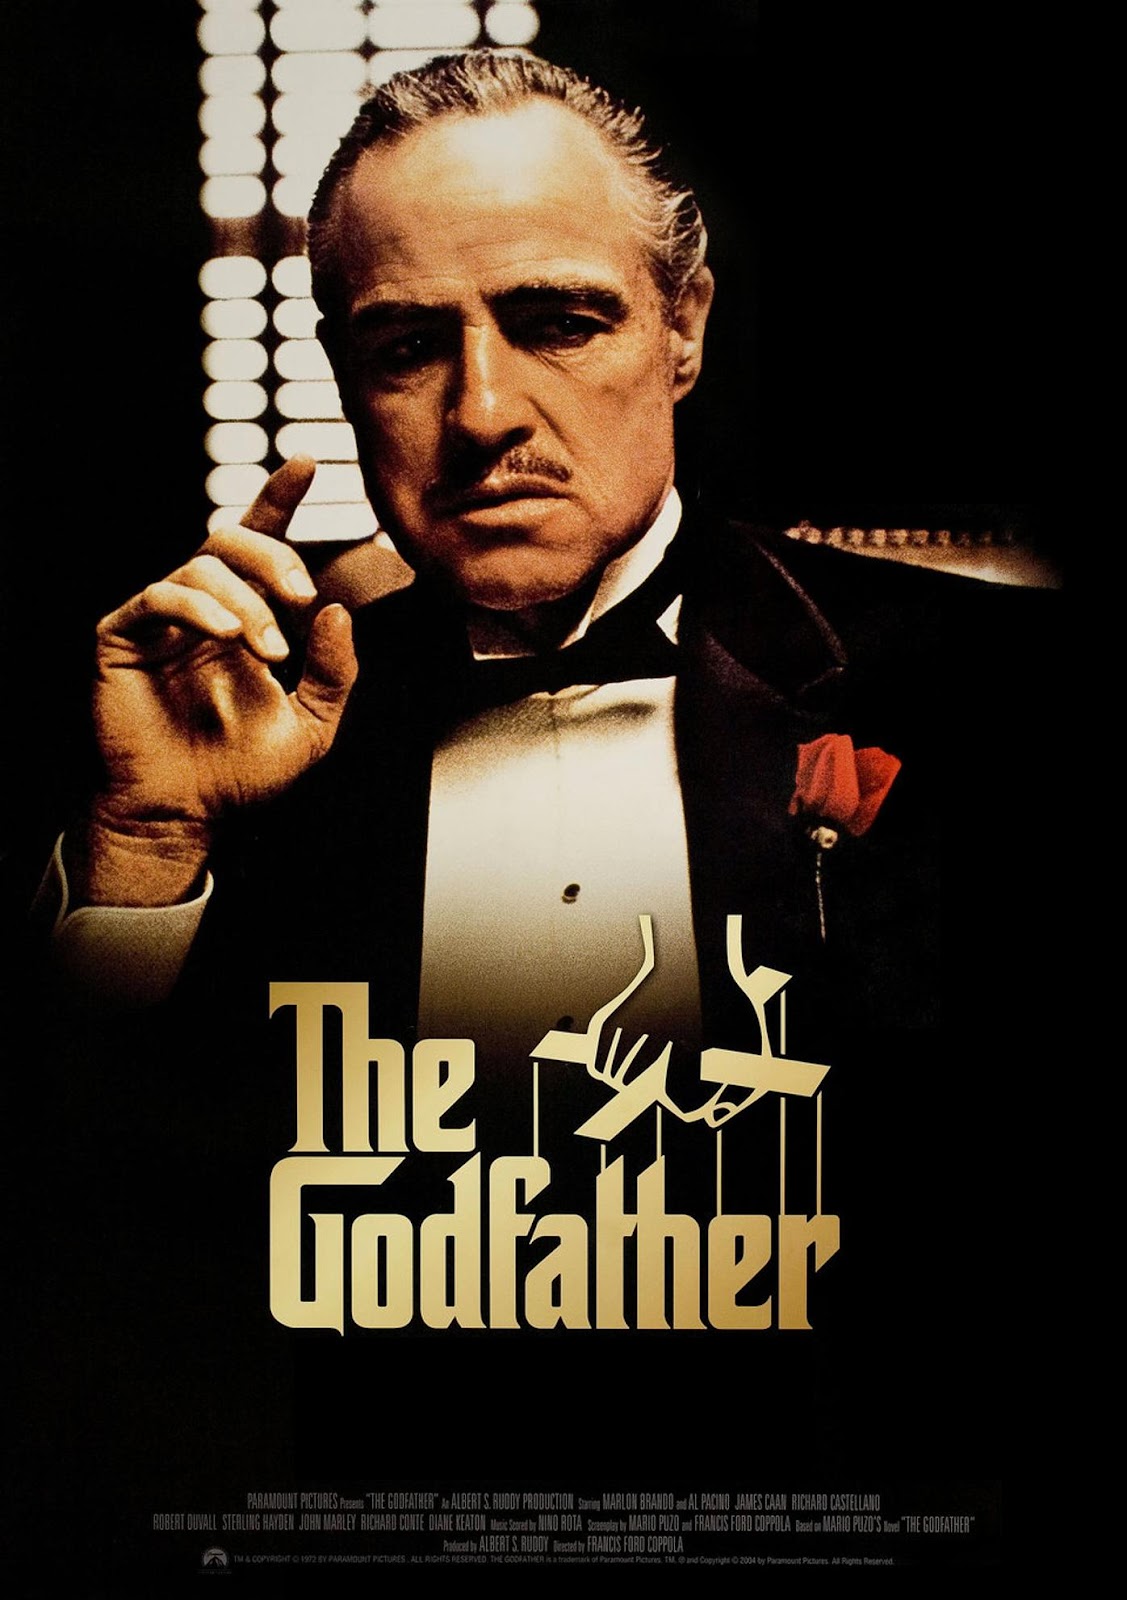 Poster of "The Godfather" (1972)